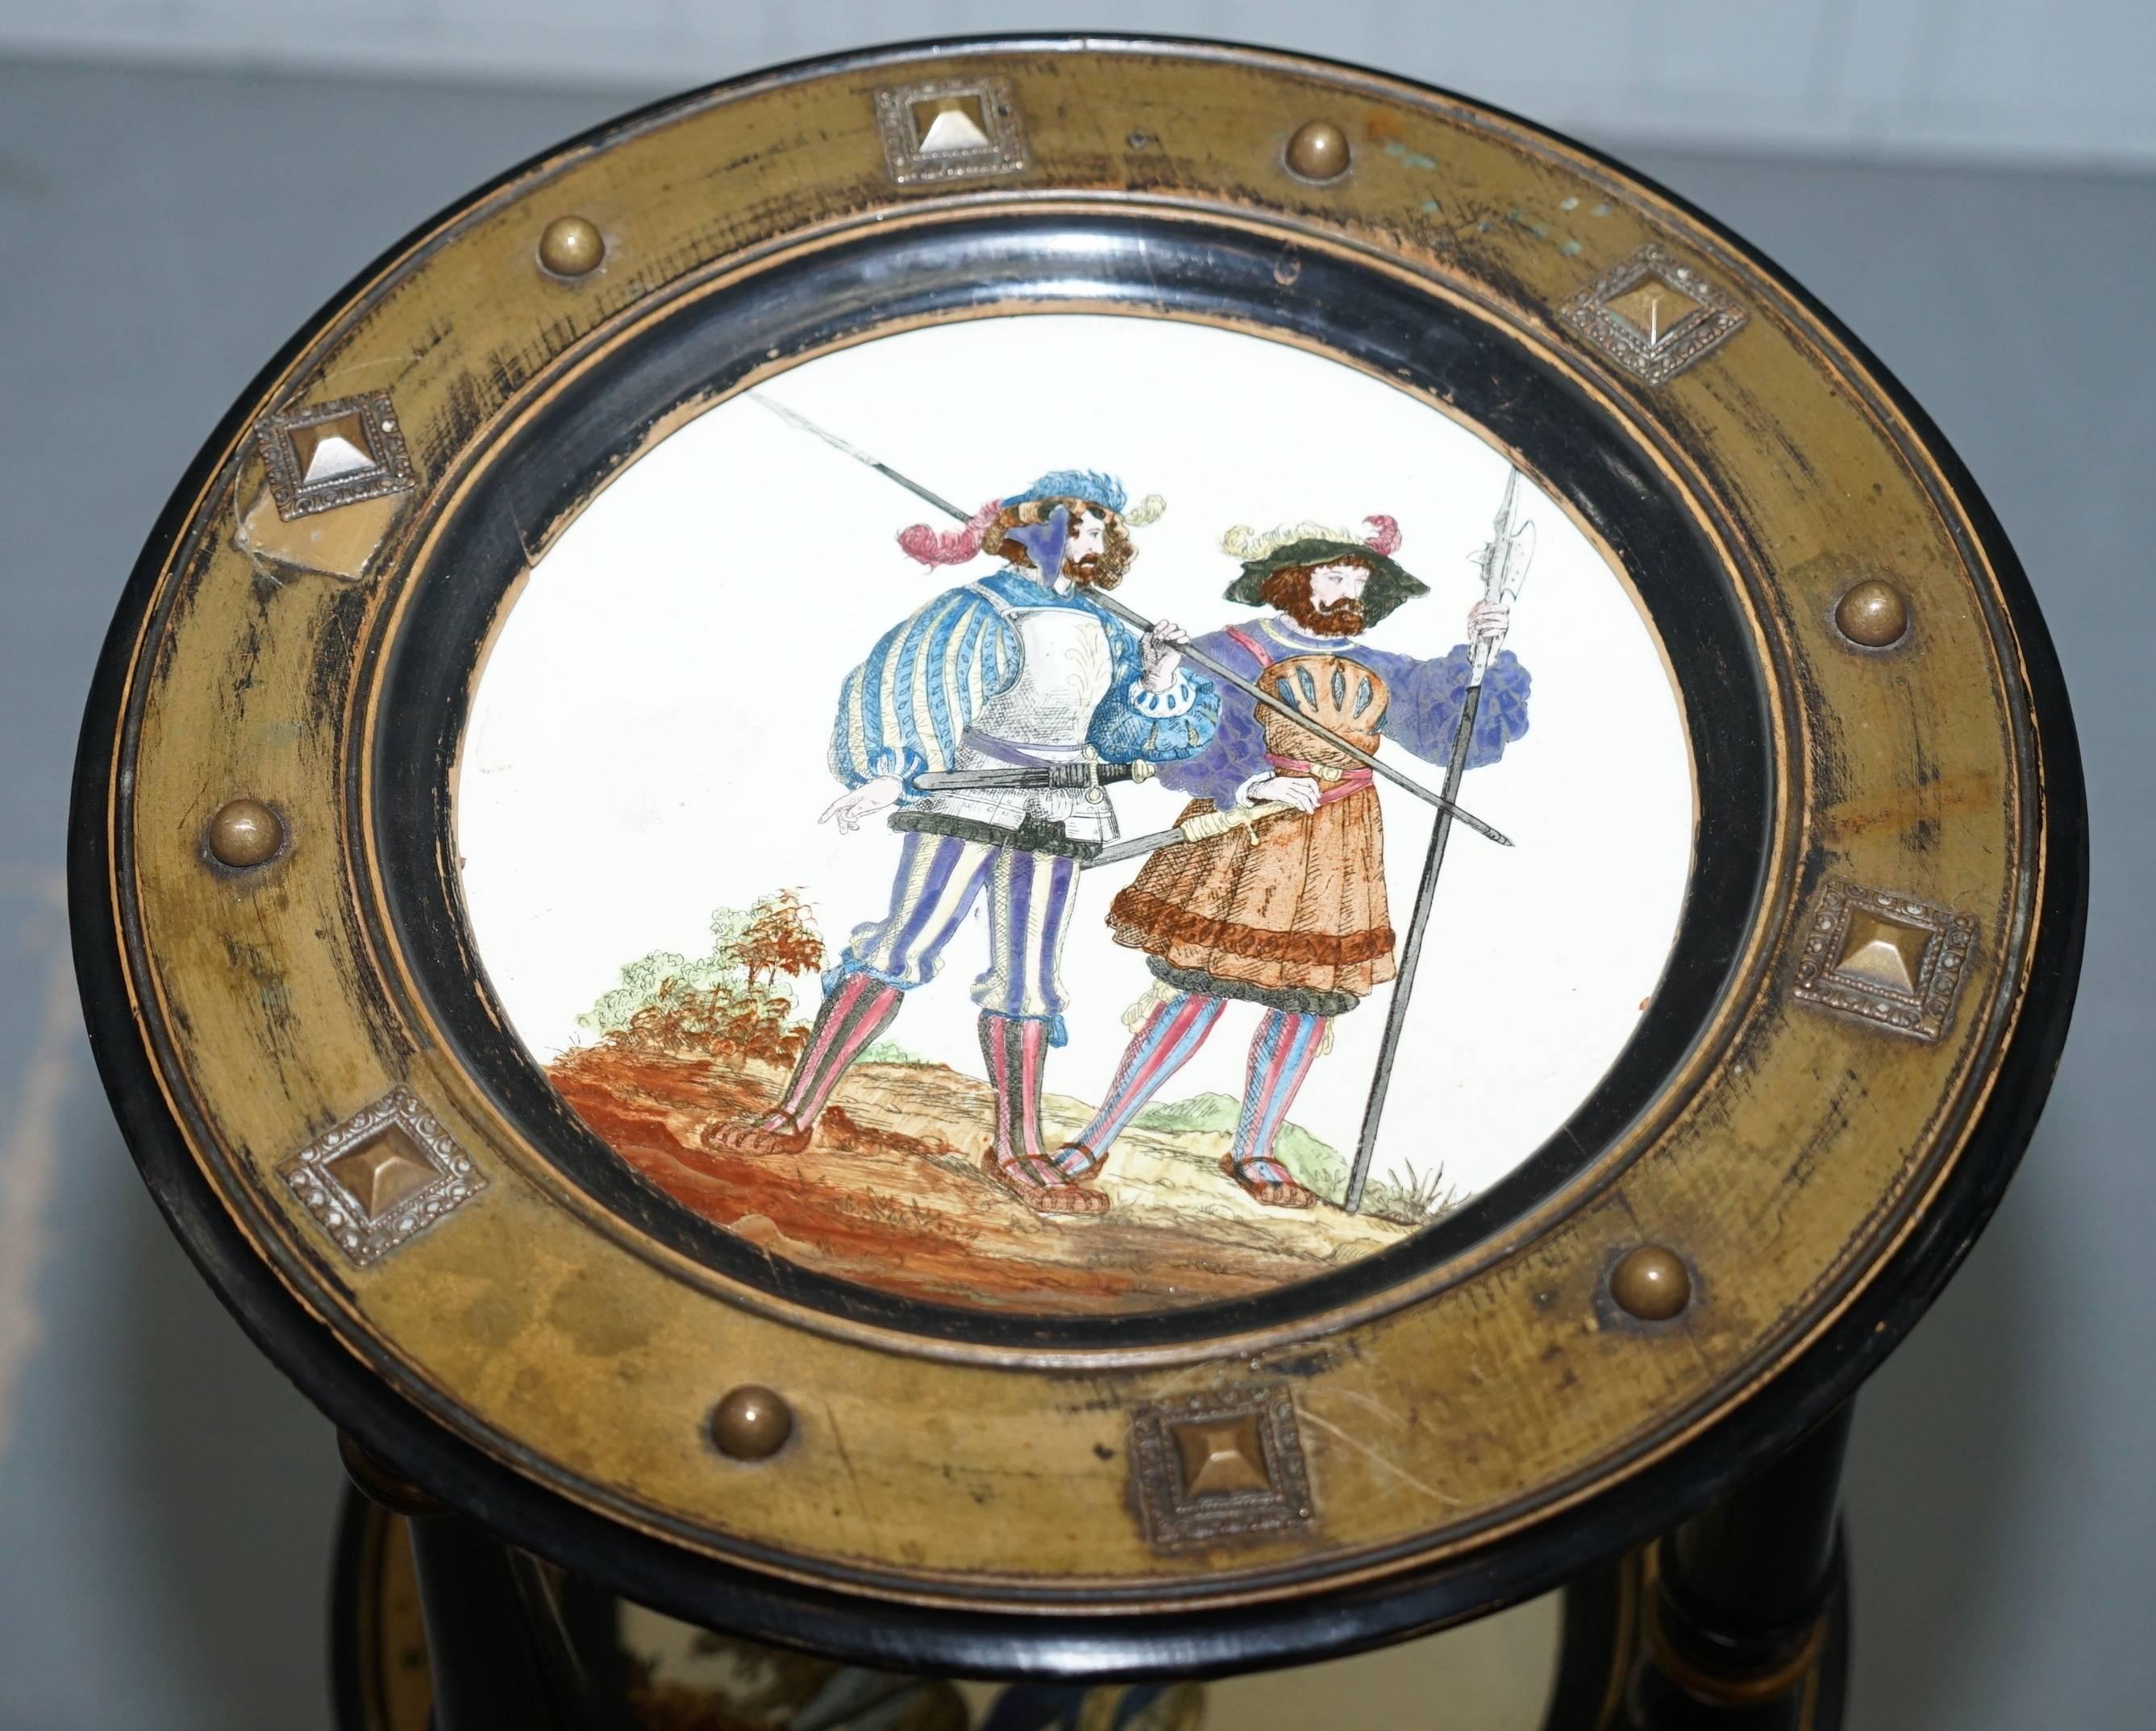 We are delighted to offer for sale this stunning antique Aesthetic movement early 19th century three tired stand with hand-painted plates depicting military scenes.

A rare well made and good looking thing, the plates seem to be porcelain china,